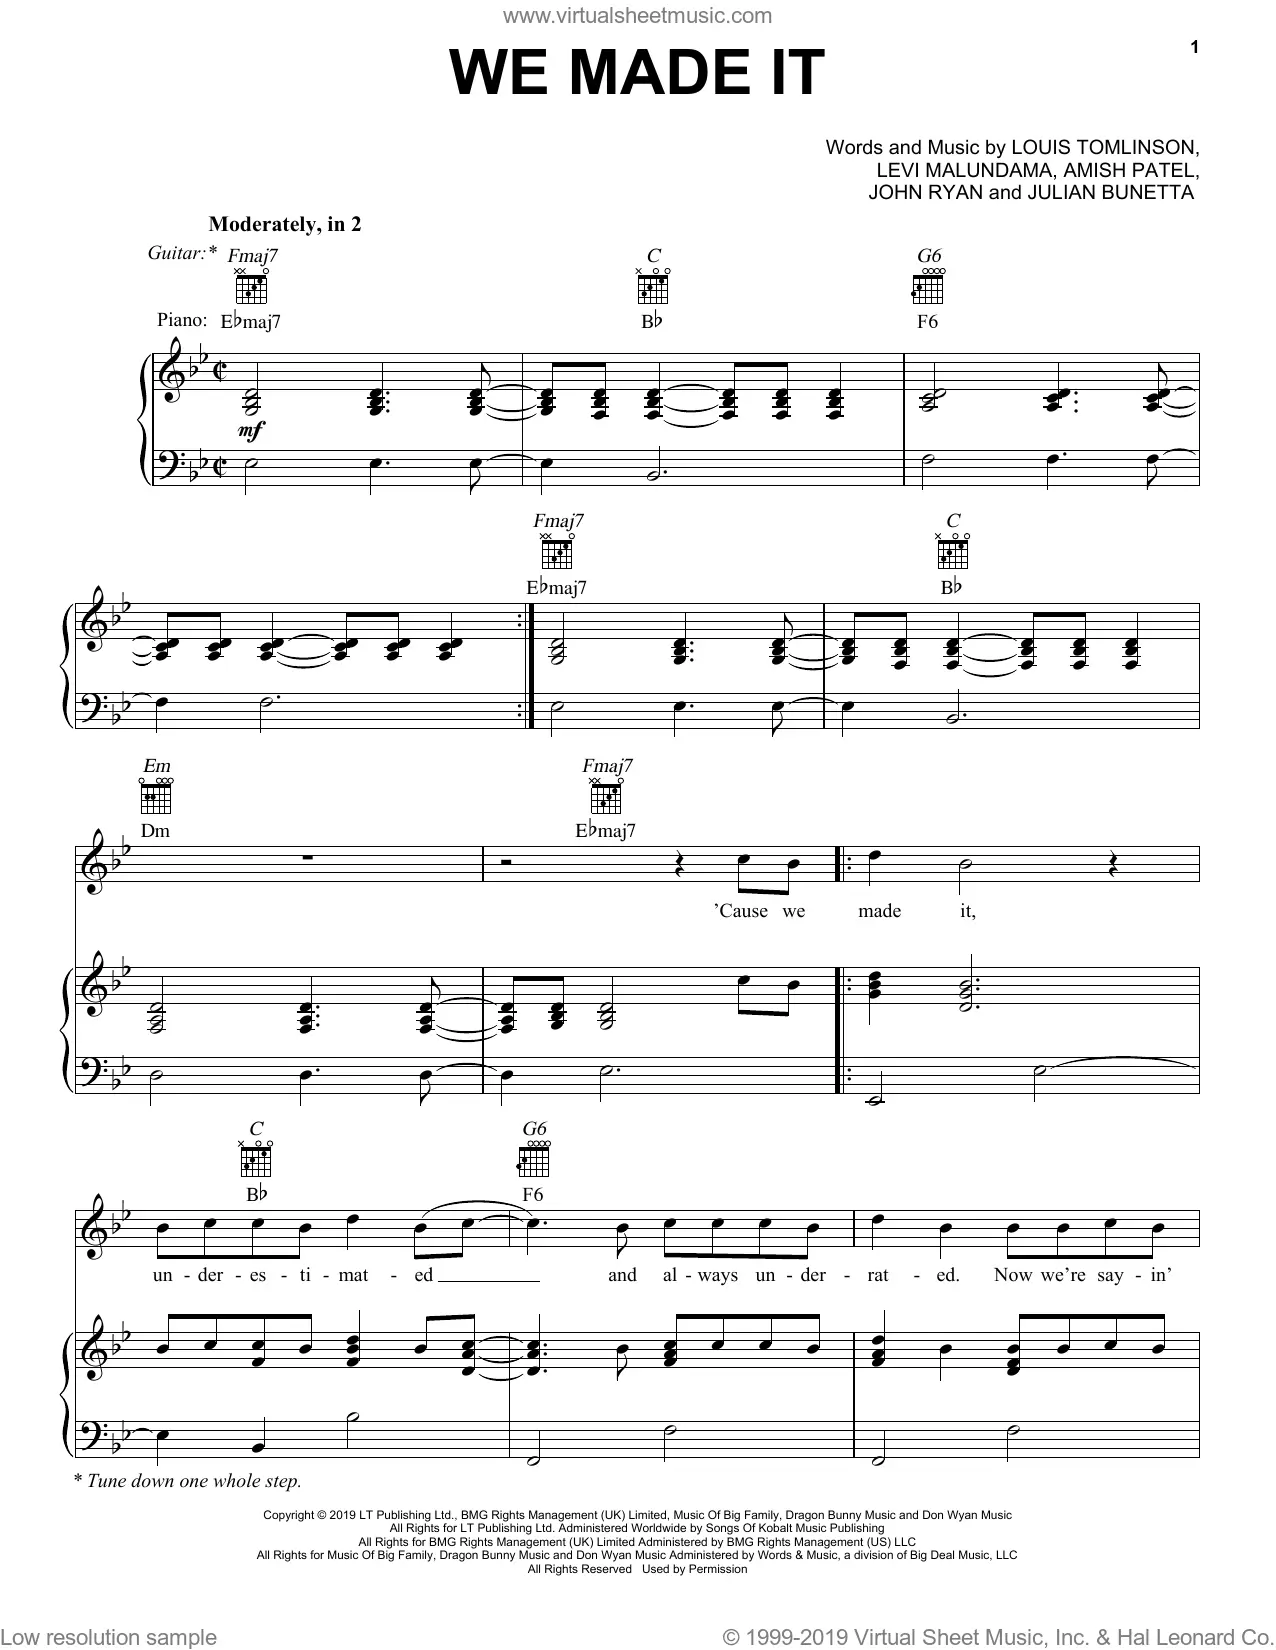 Walls" Sheet Music by Louis Tomlinson for Piano/Vocal/Chords - Sheet  Music Now